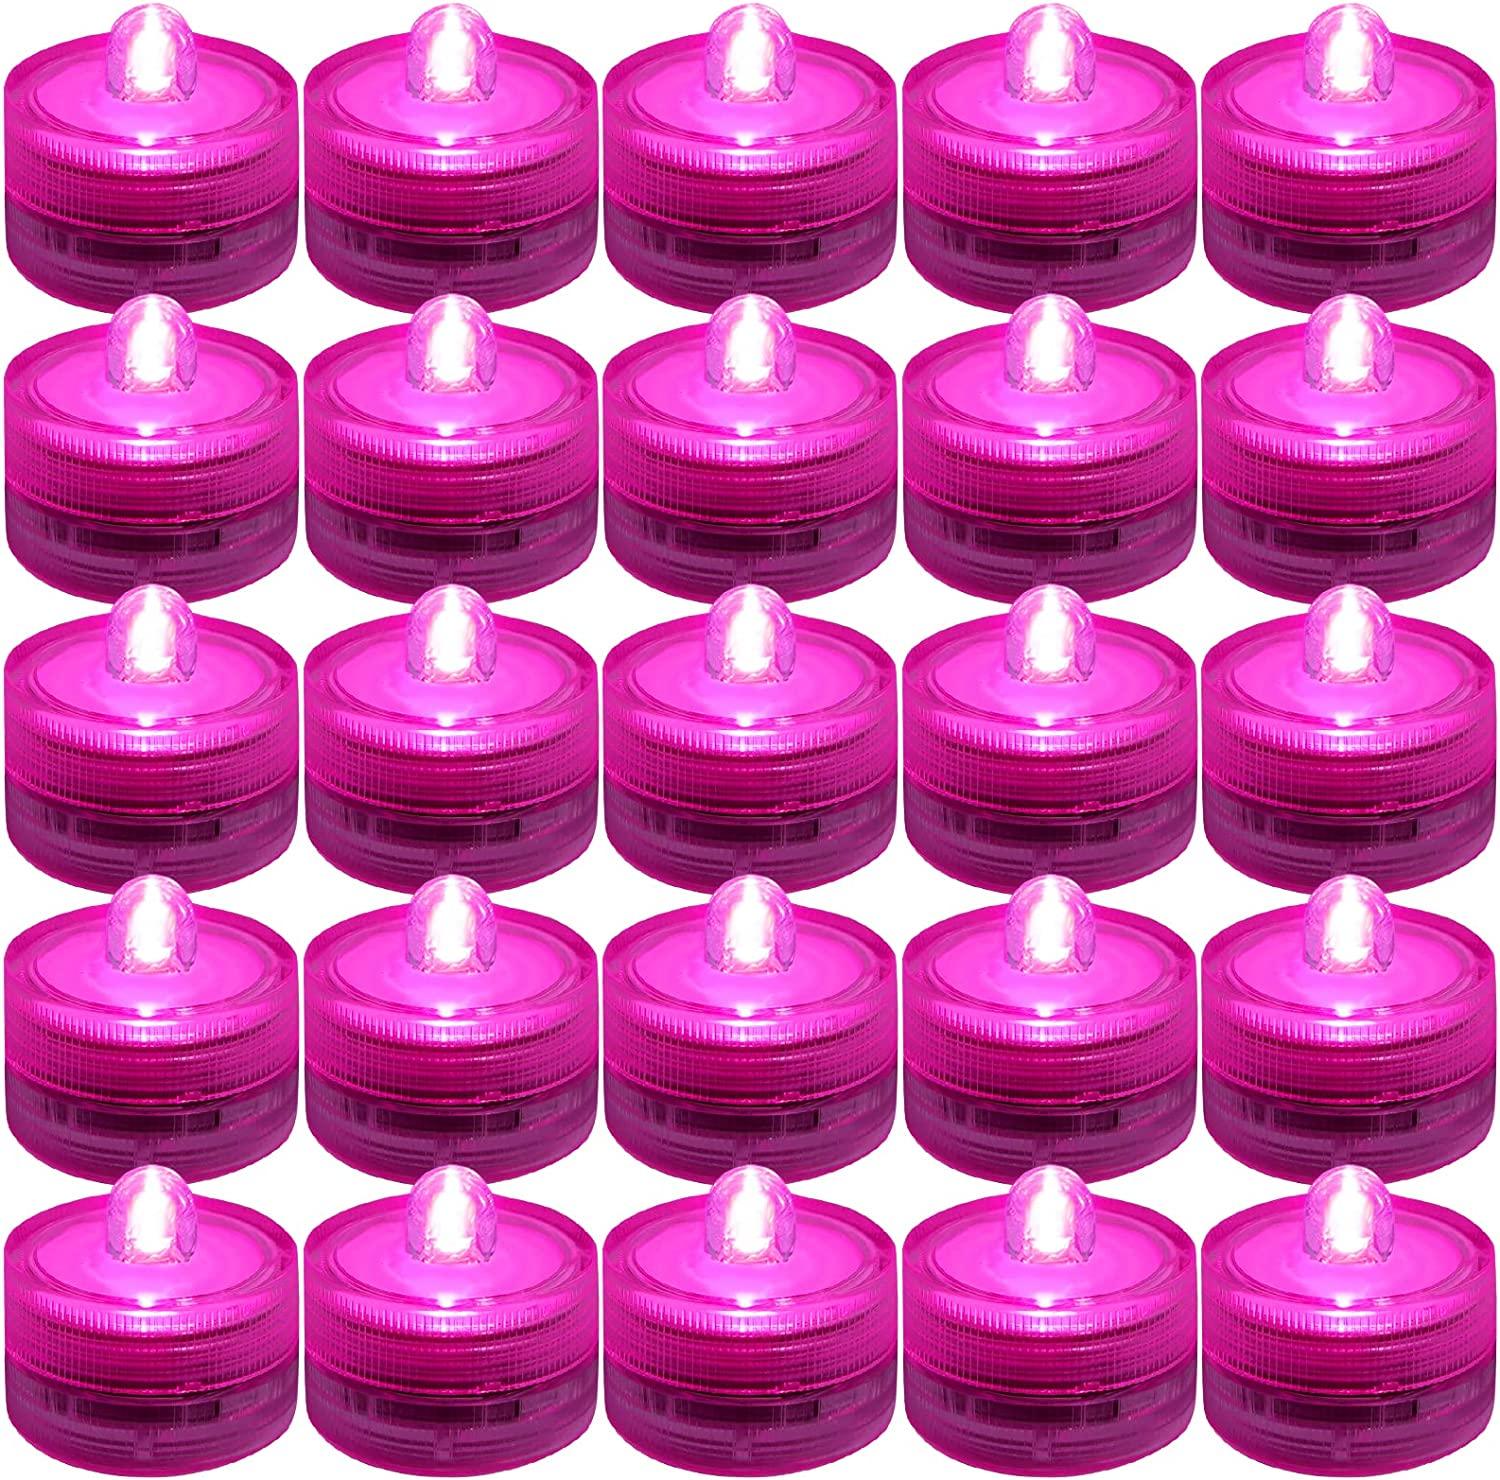 Submersible LED Lights,24pcs Flameless Underwater Tea Lights,Battery Powered Candle Lights - If you say i do